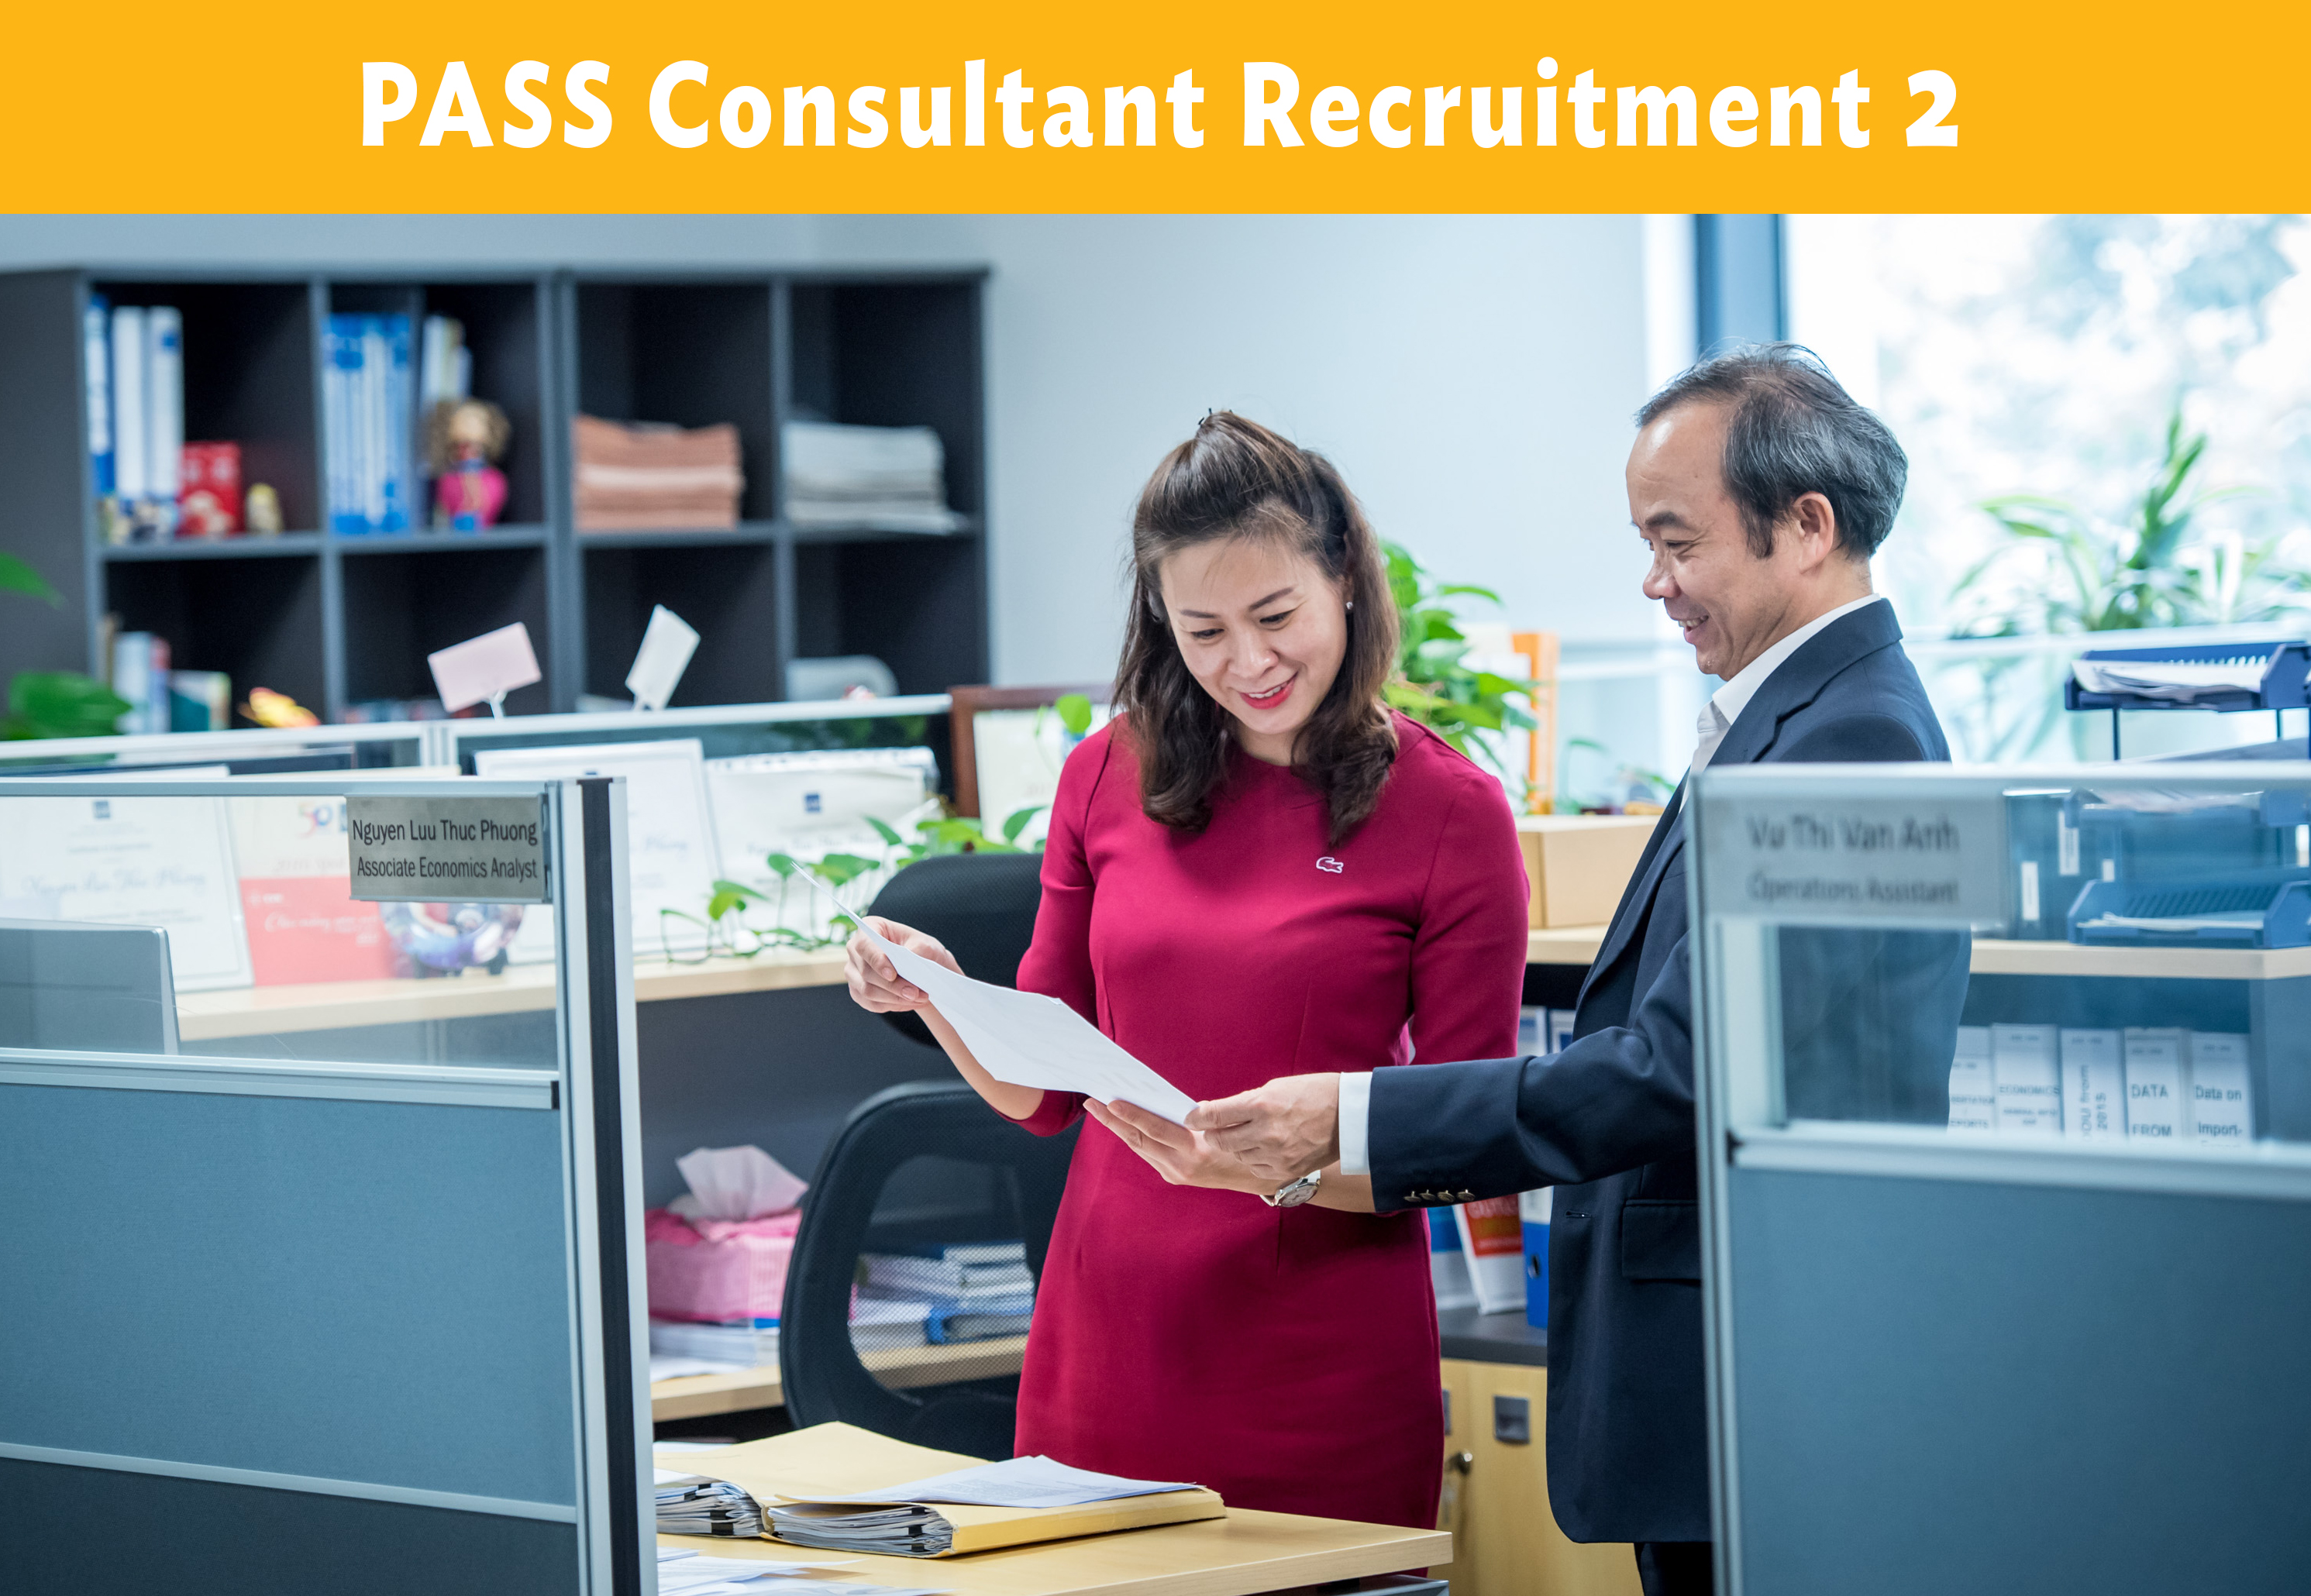 PASS Consultant Recruitment for Loan Projects - Module 2